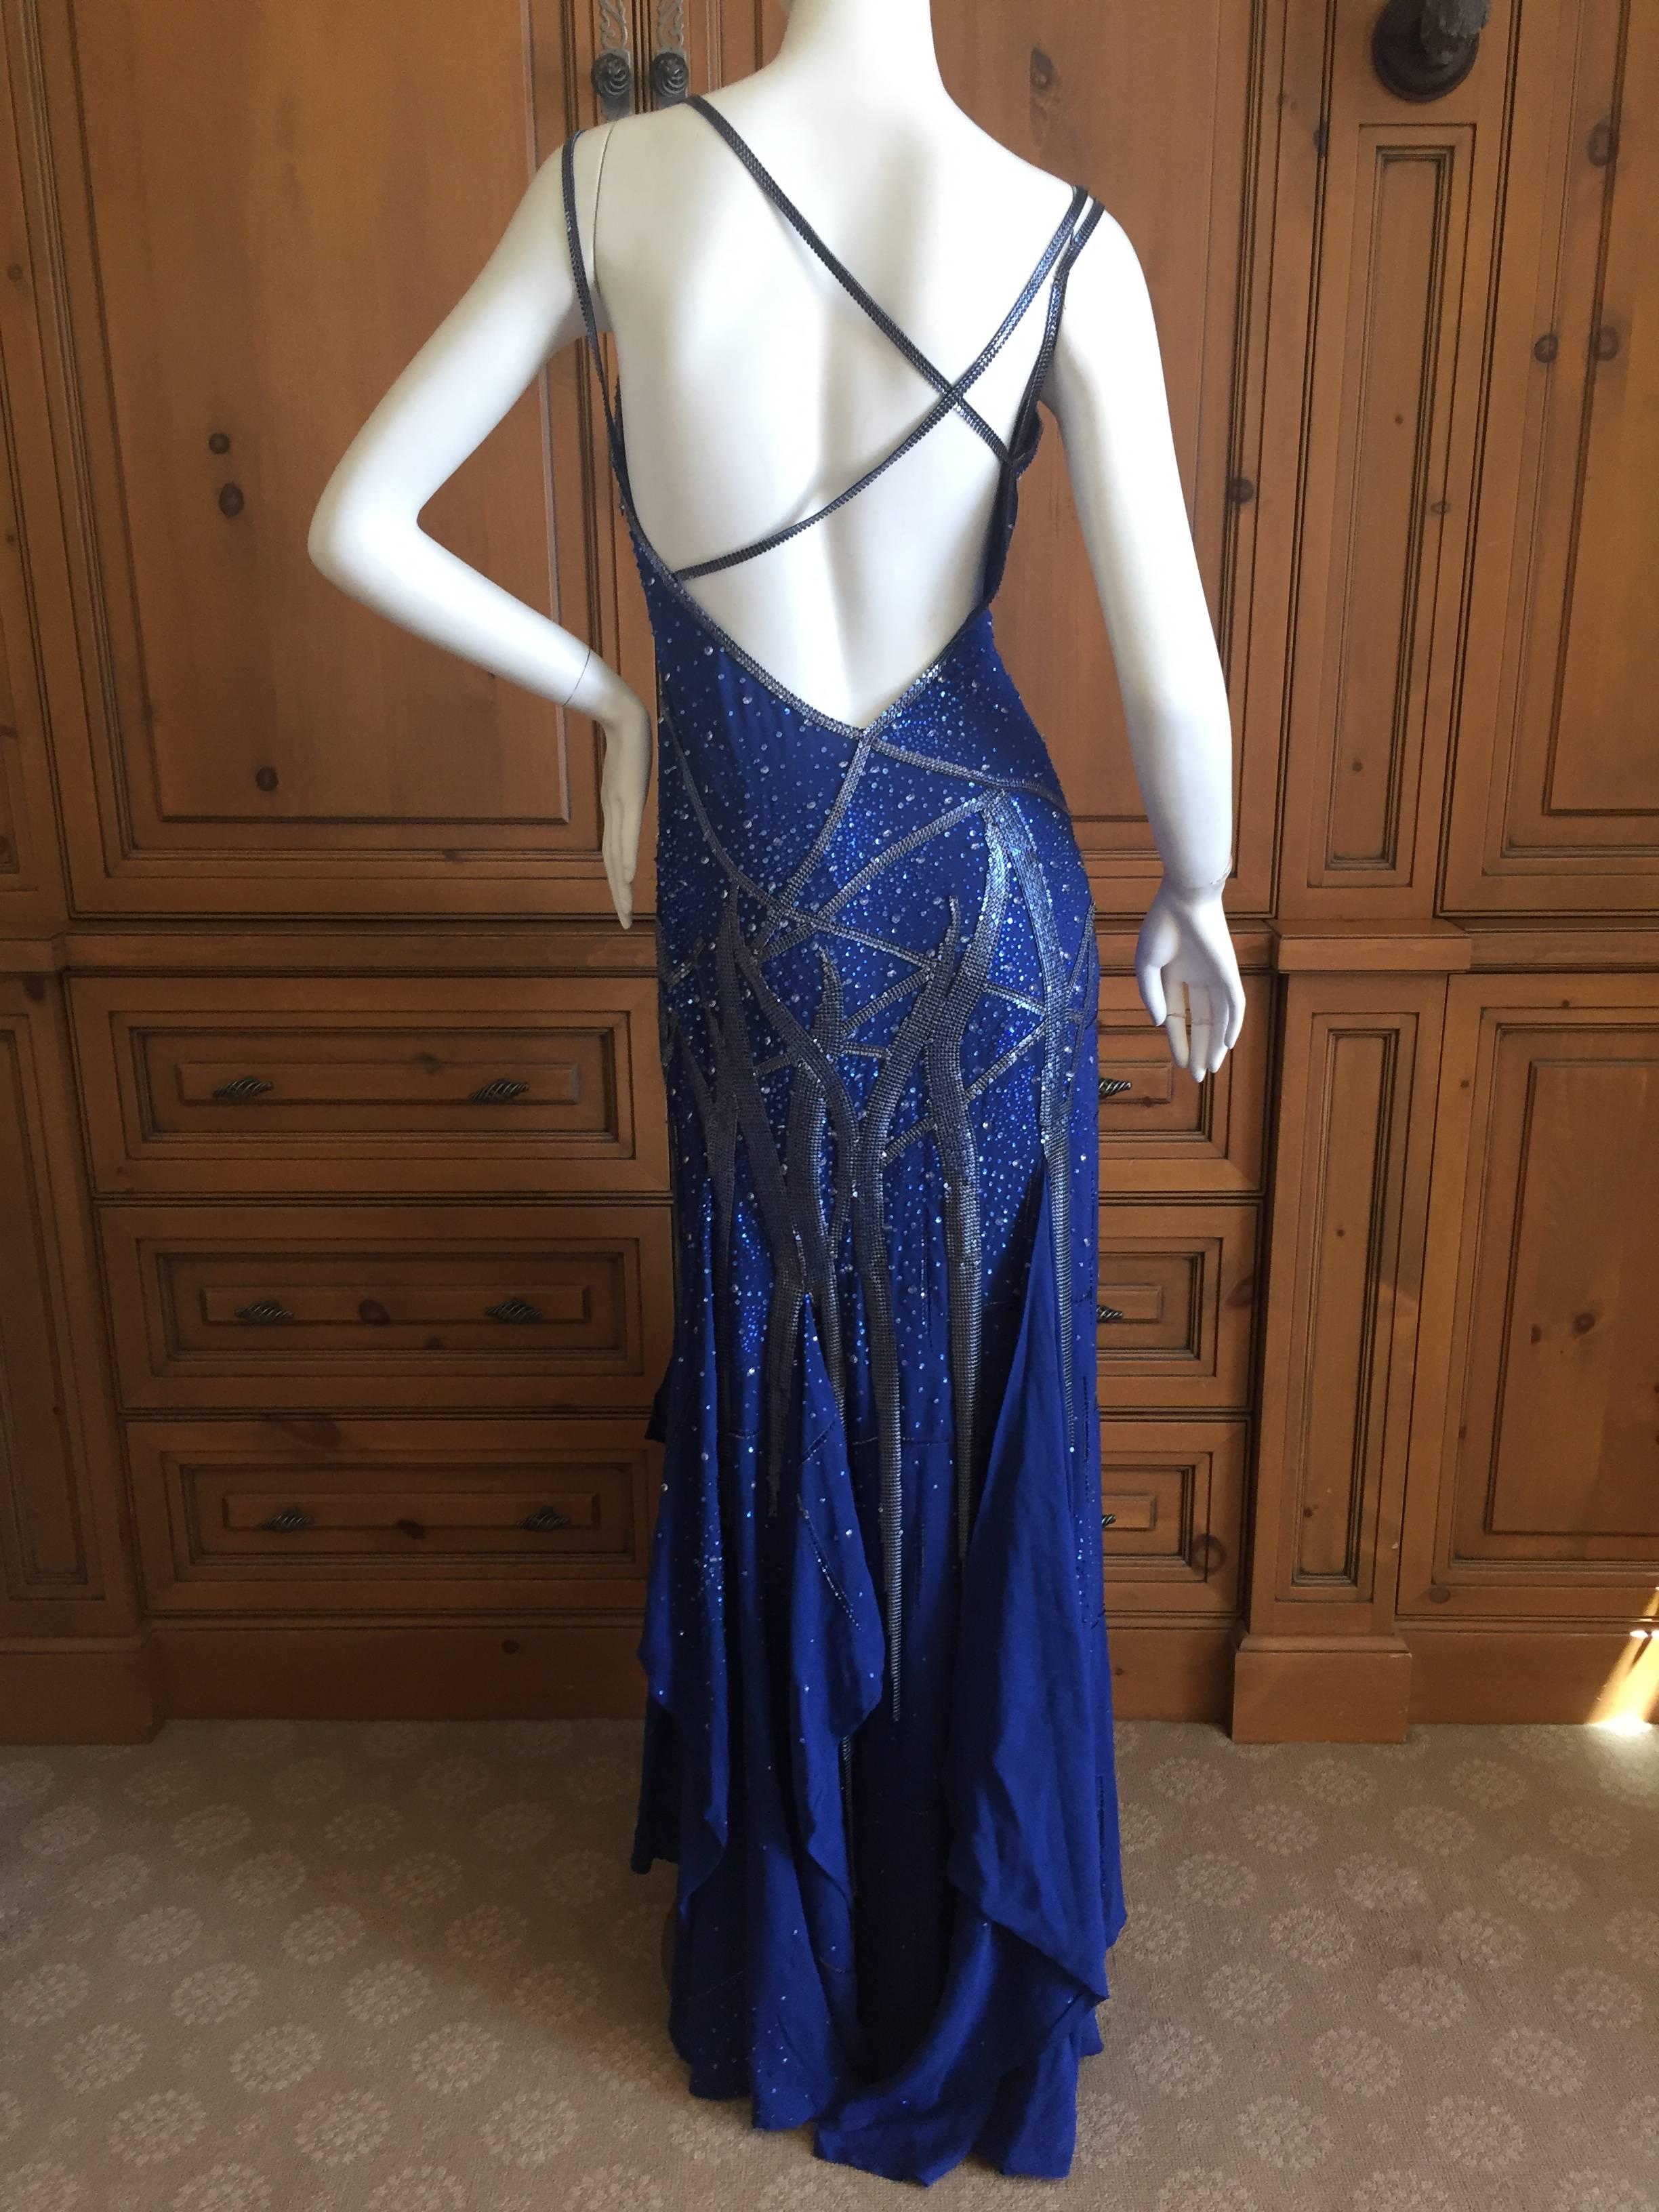 Atelier Versace Gianni Era Blue Evening Dress with Metal Mesh and Crystal Detail For Sale 1